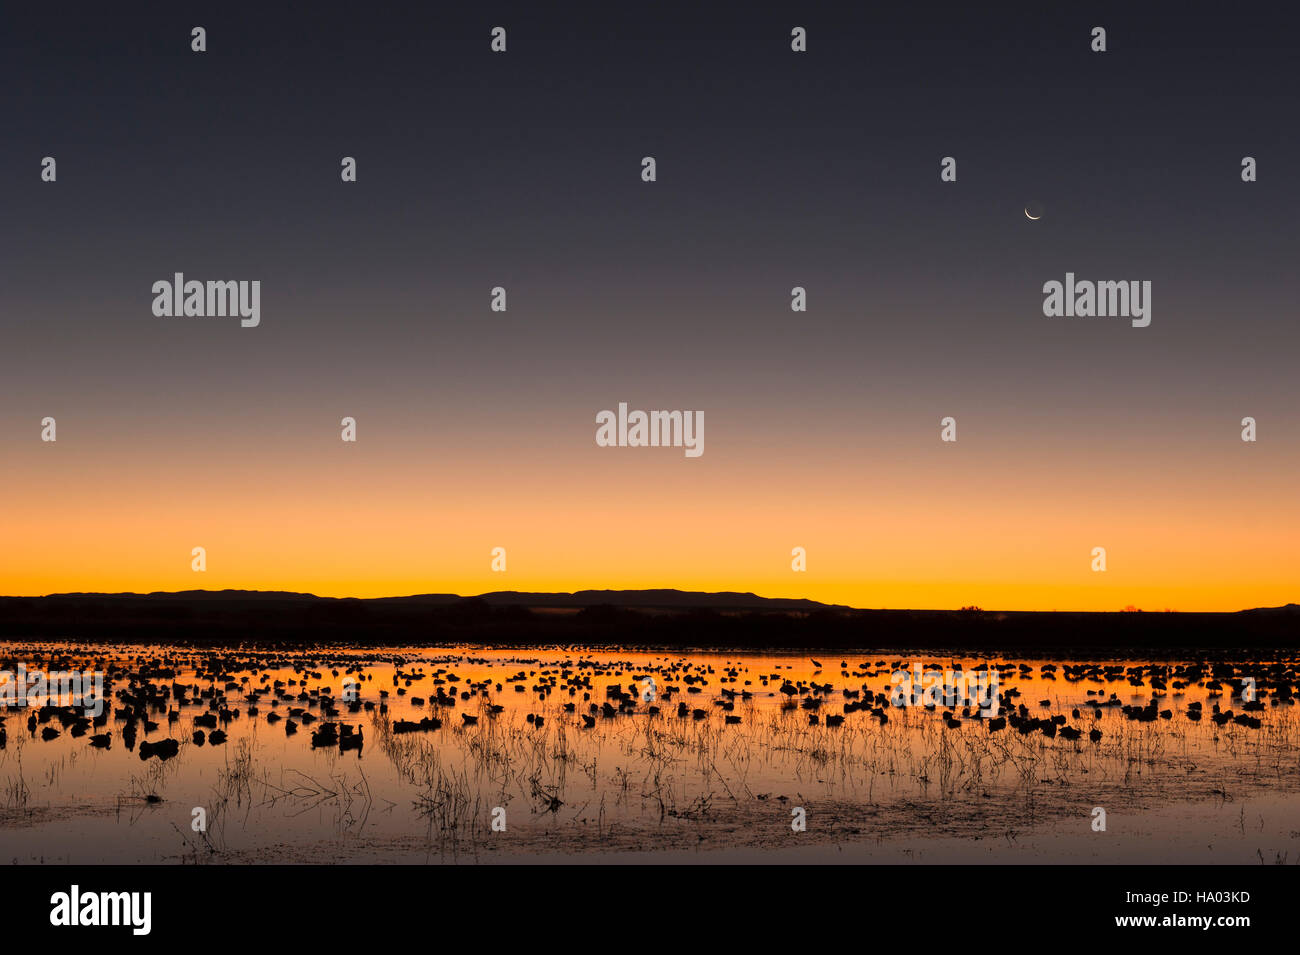 Atmospheric landscape, view of the lake at Bosque del Apache National Wildlife Refuge in New Mexico, USA, at dawn with waterfowl silhouettes. Stock Photo